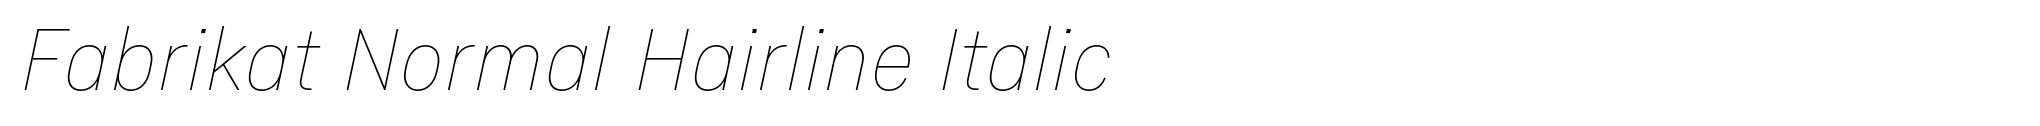 Fabrikat Normal Hairline Italic image